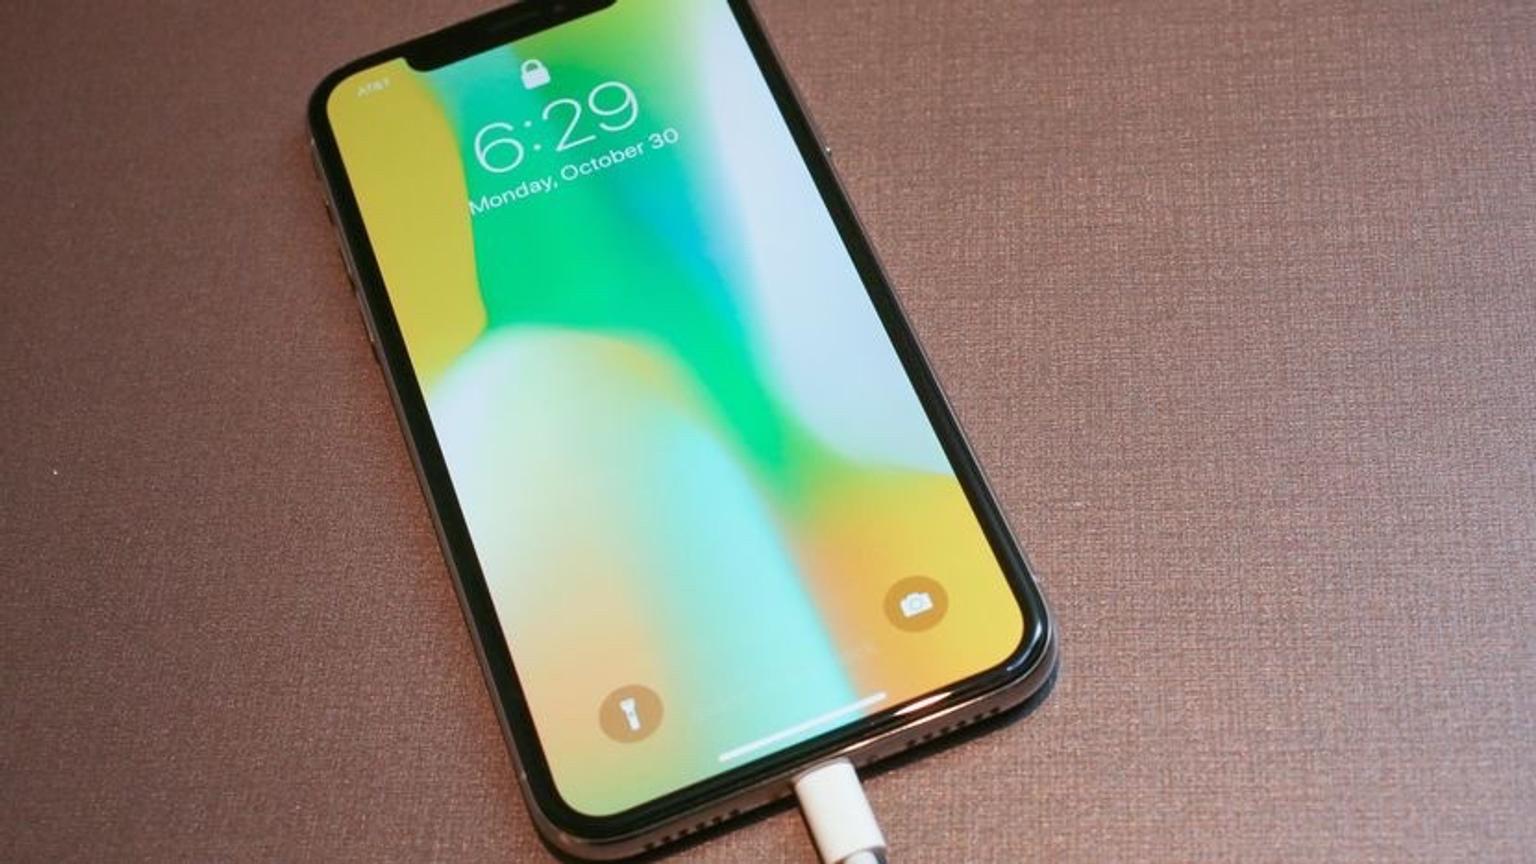 Brand New Iphone X 256gb In E15 Forest For 7 00 For Sale Shpock